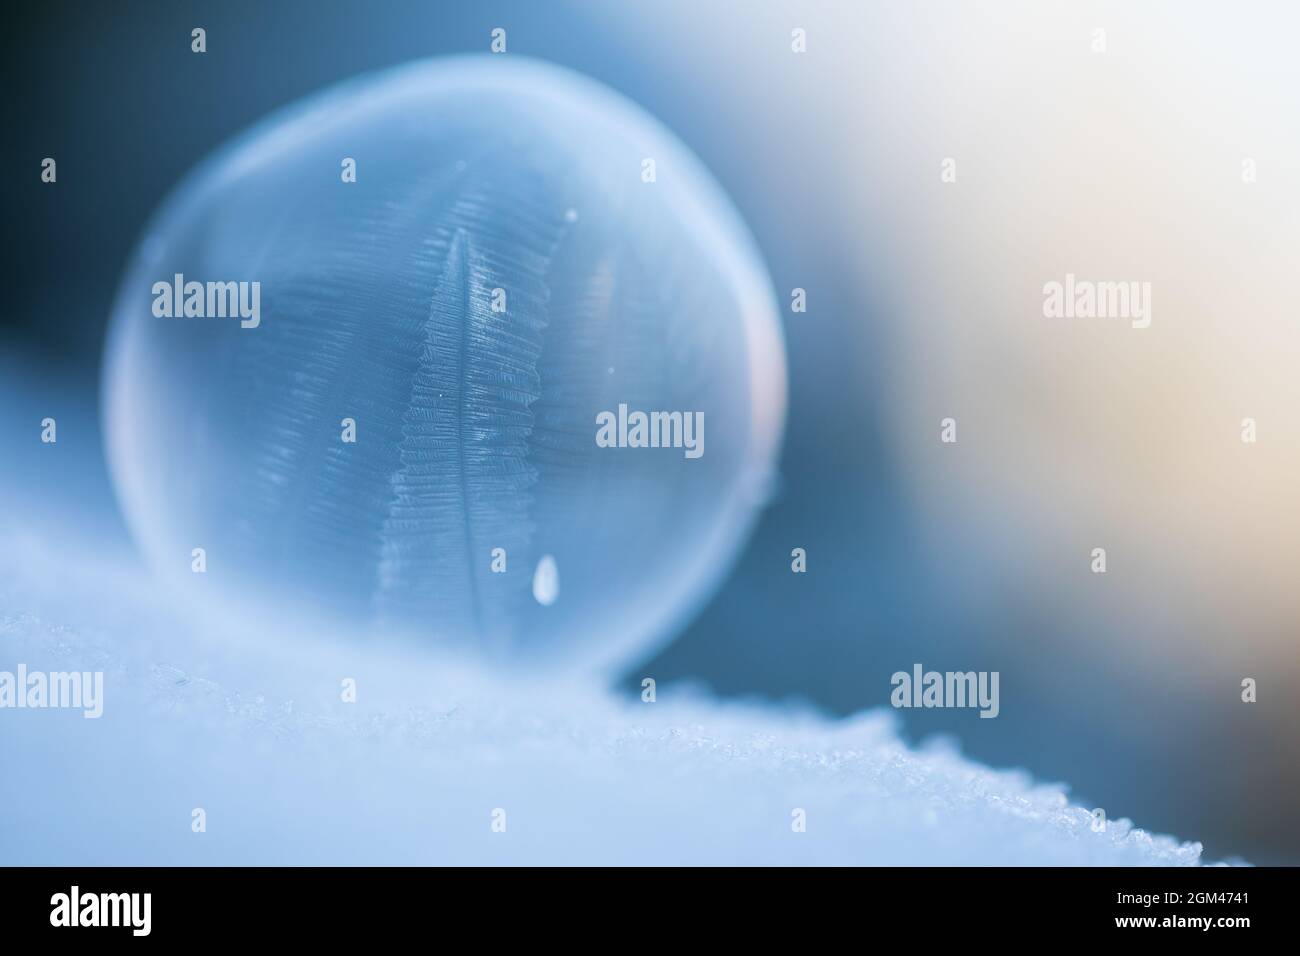 Frozen soap bubble. At a temperature below approximately -10 degrees celcius soap bubbles will freeze to ice before they burst. Stock Photo